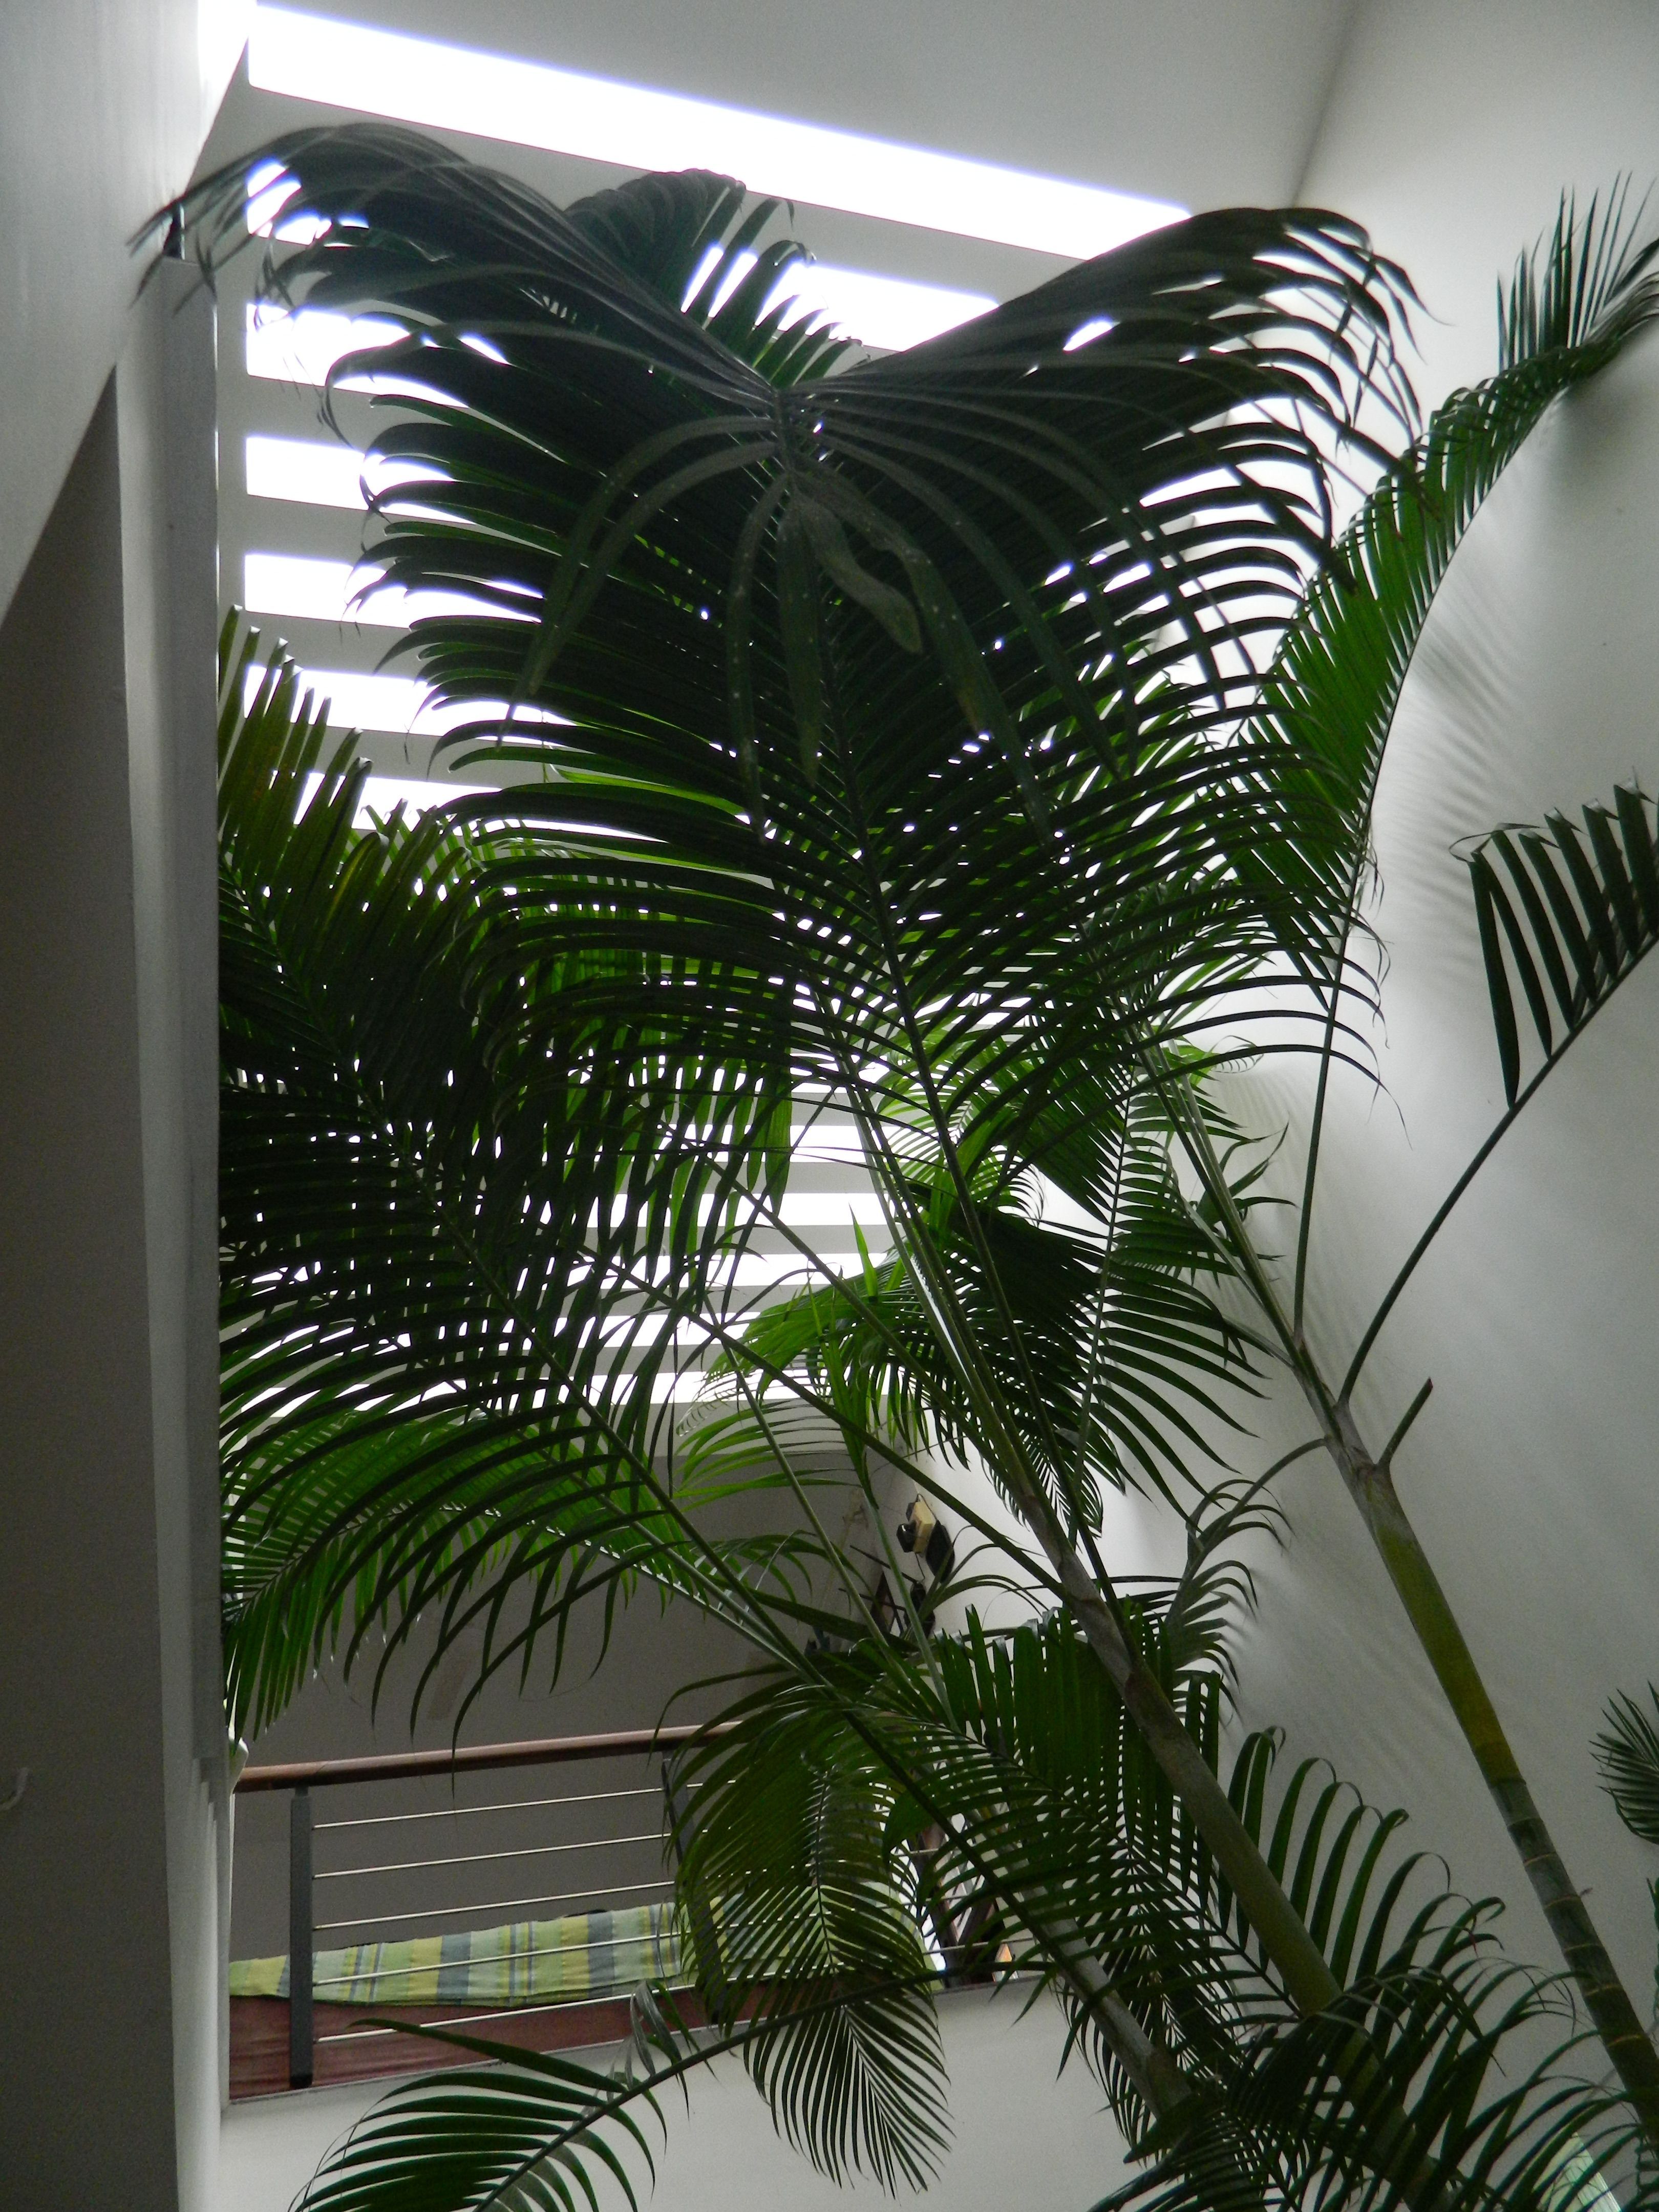 A palm tree is growing in the corner of an indoor room - Plants